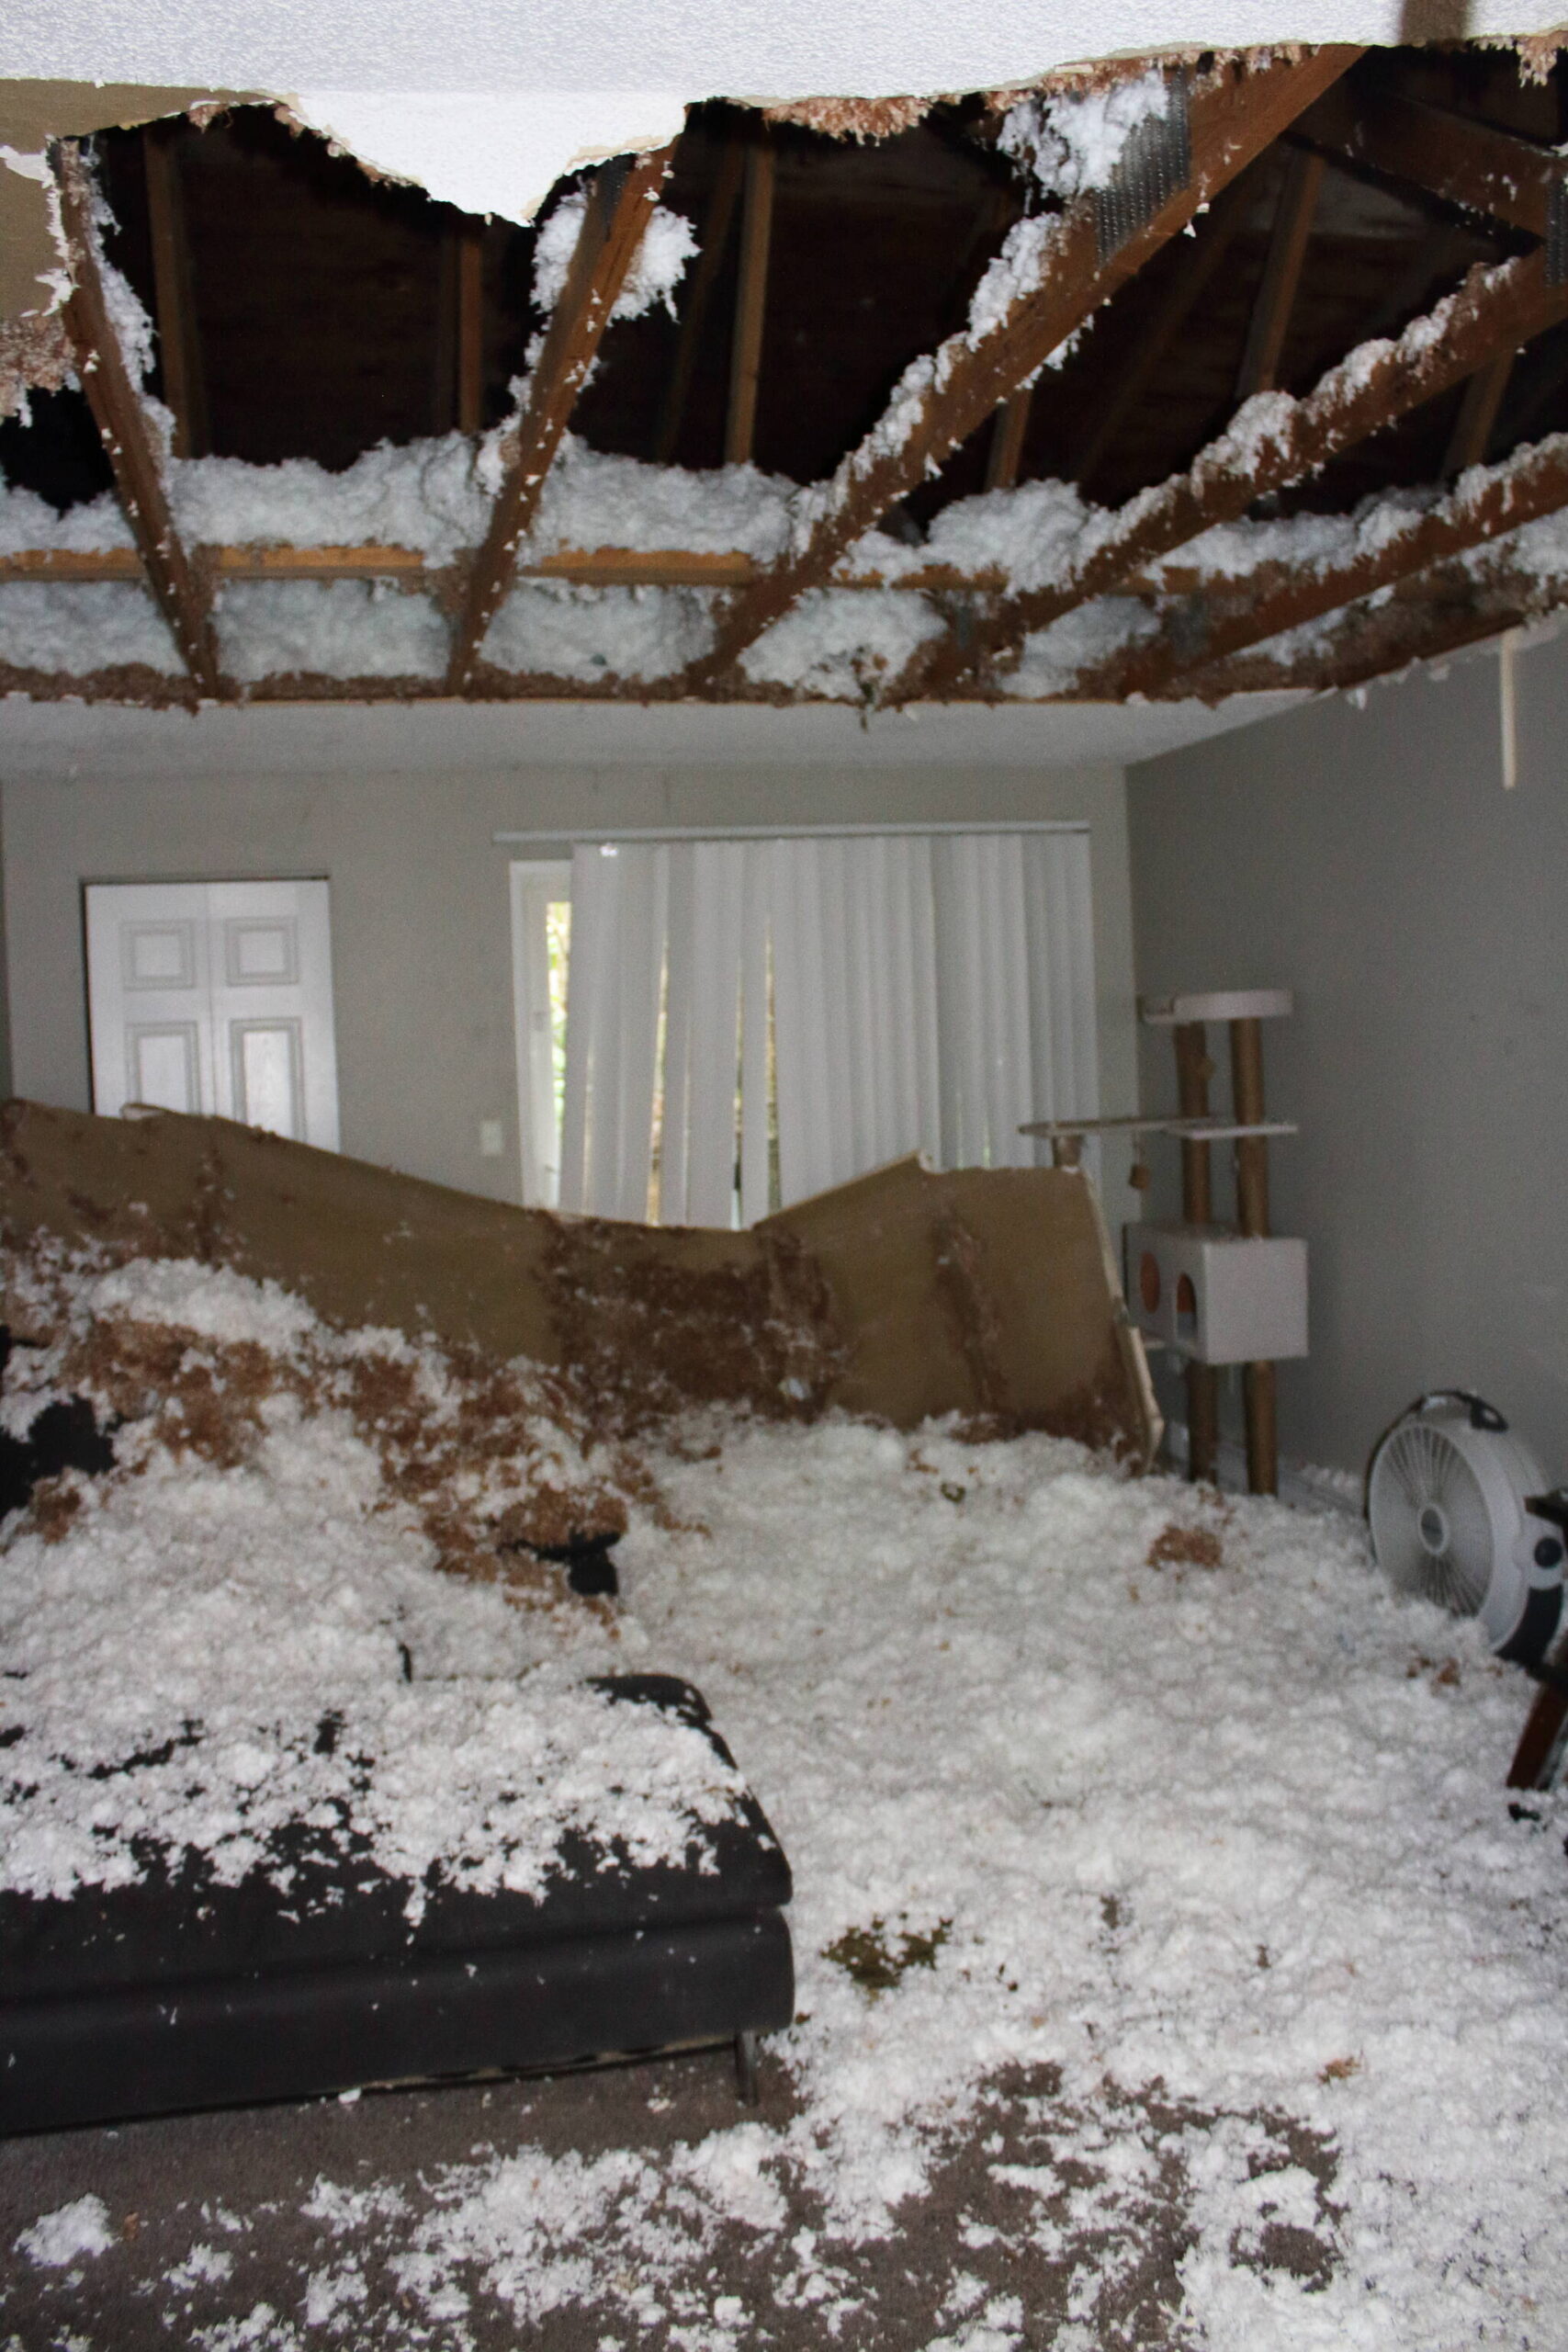 Naked beams and insulation are all that is left after the ceiling fell in for the second time in Katherine Blinkova’s apartment. Photo by Keelin Everly-Lang / The Mirror